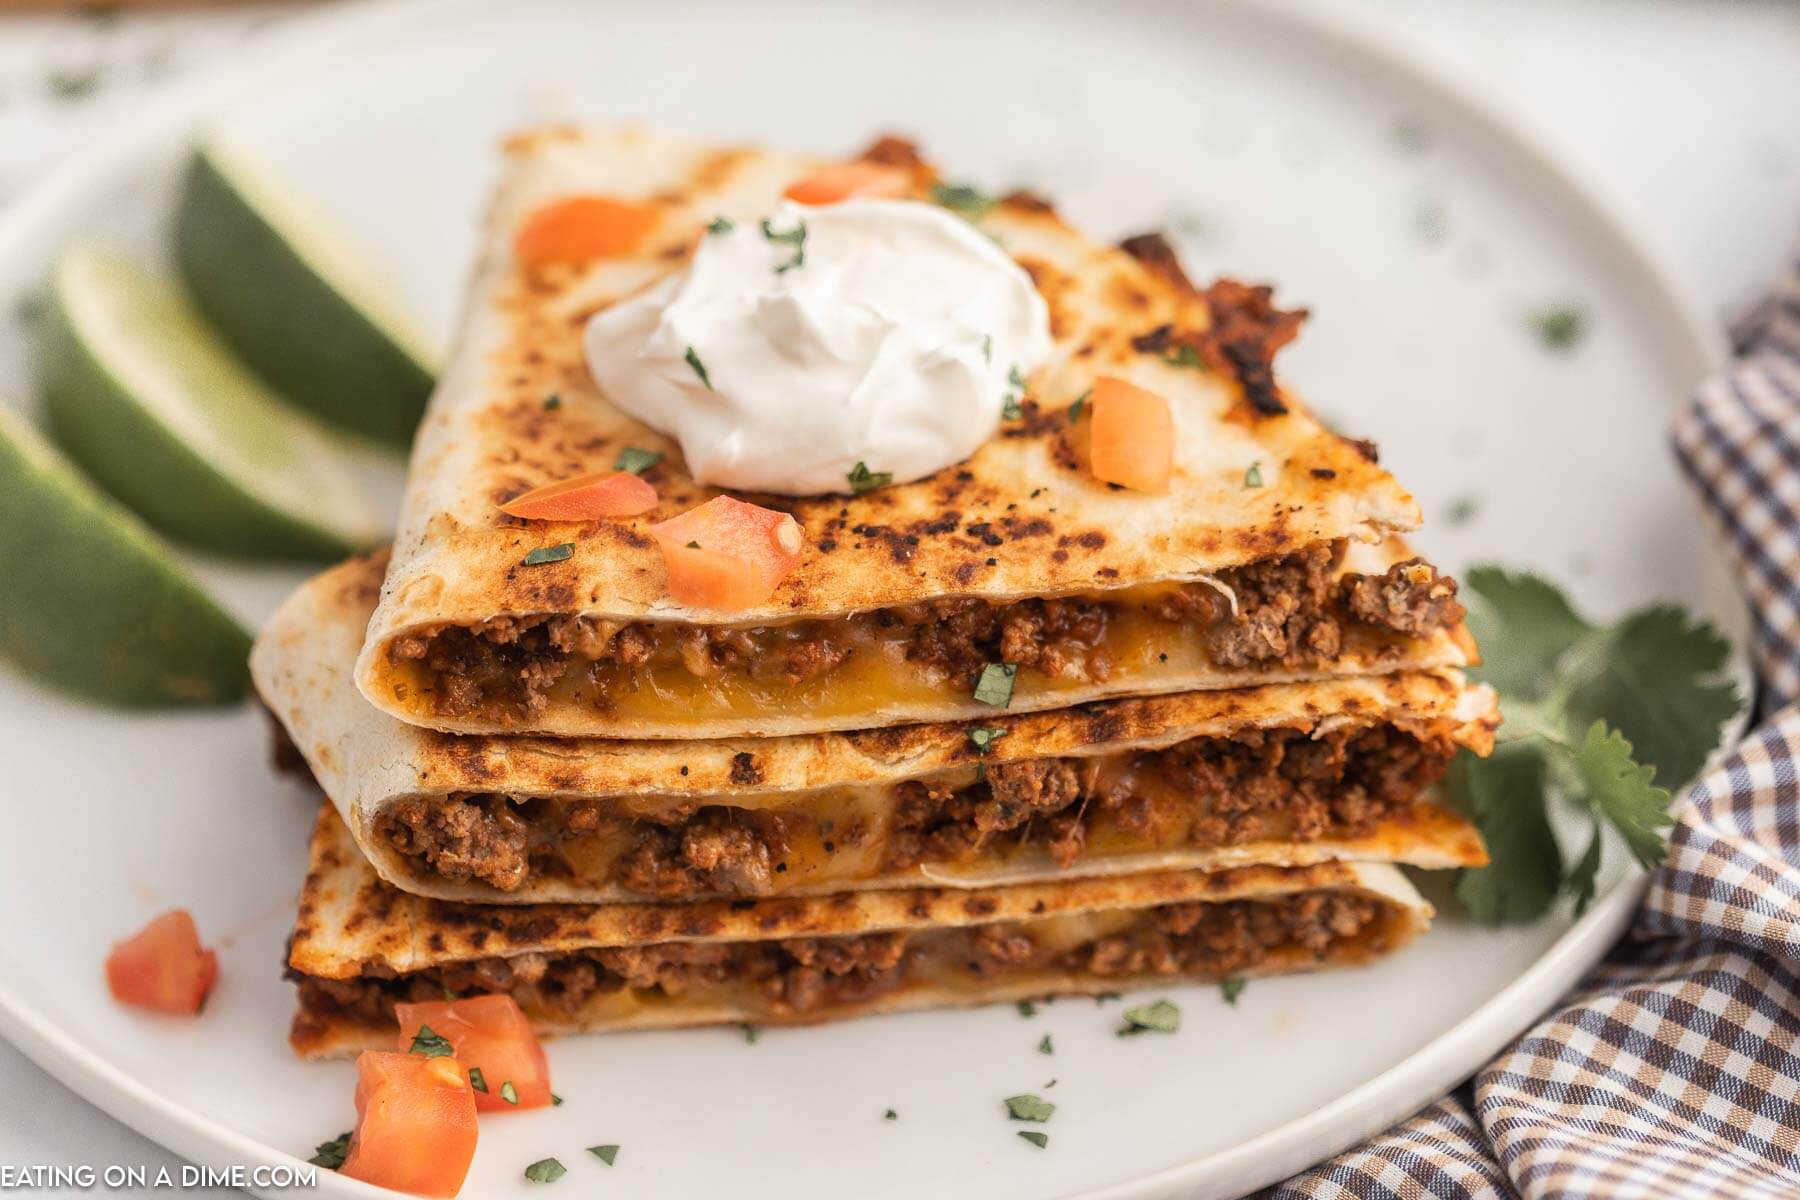 Cheesy Beef Quesadillas stacked and topped with sour cream